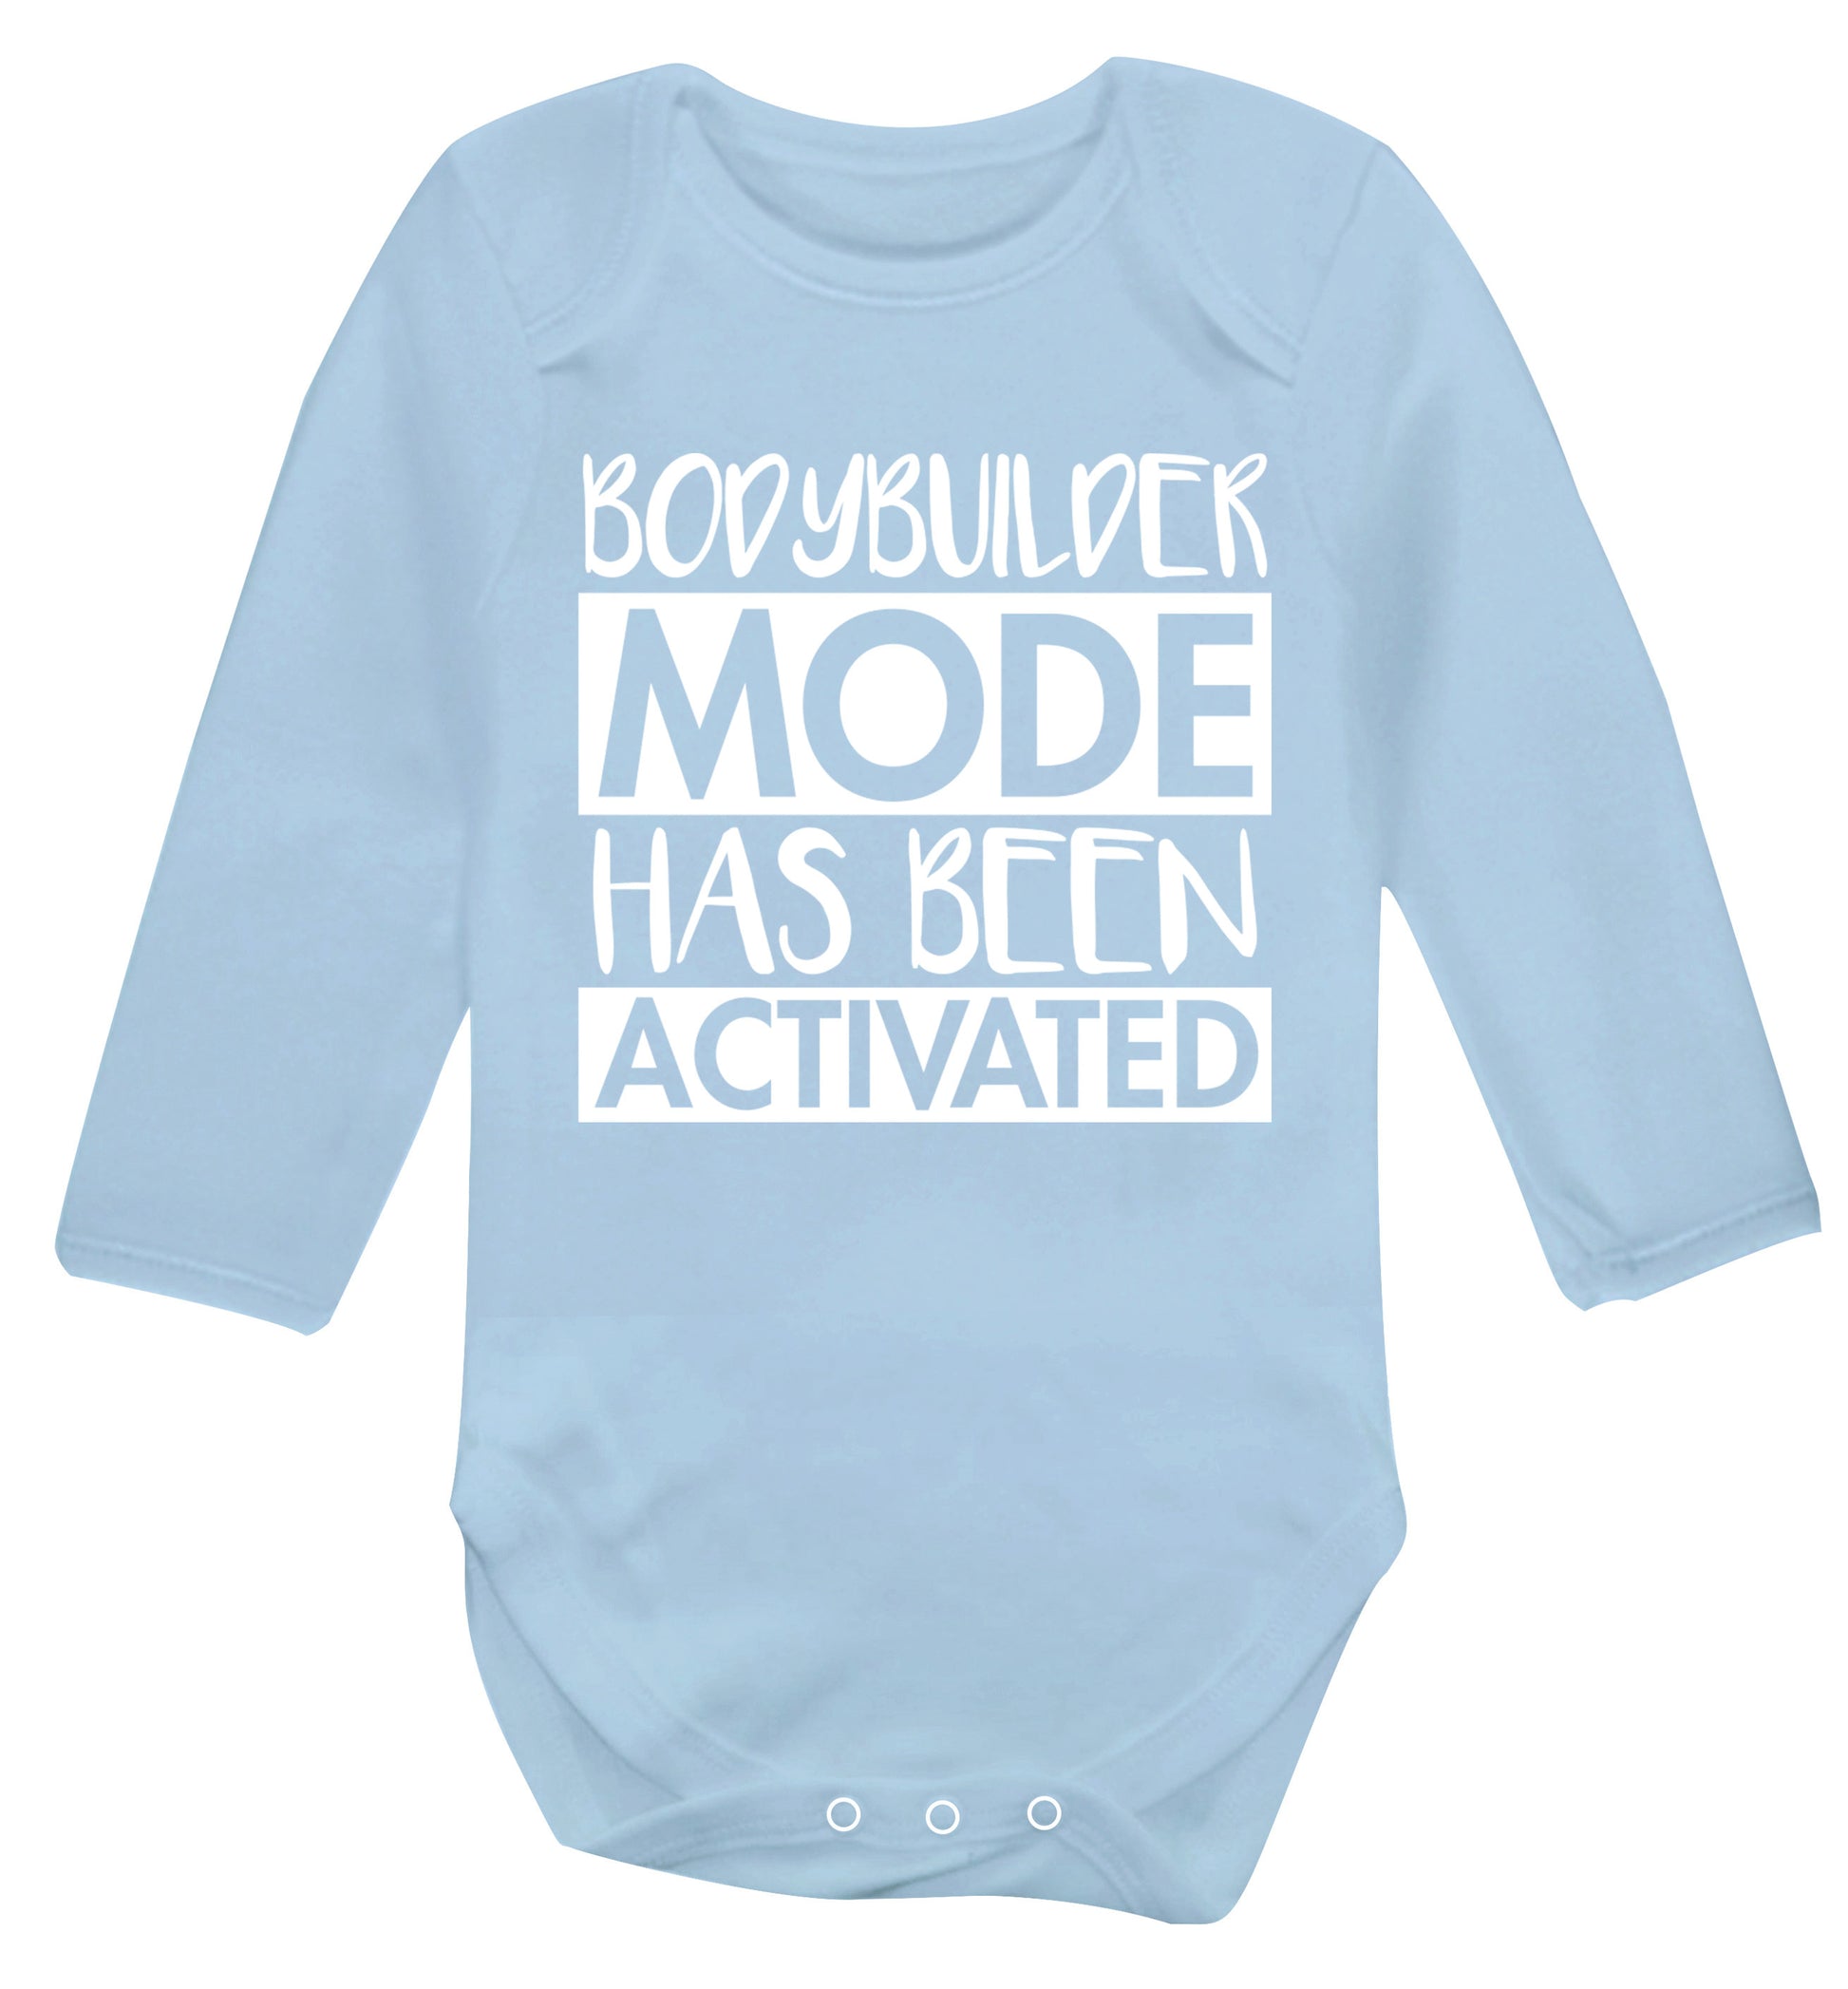 Bodybuilder mode activated Baby Vest long sleeved pale blue 6-12 months